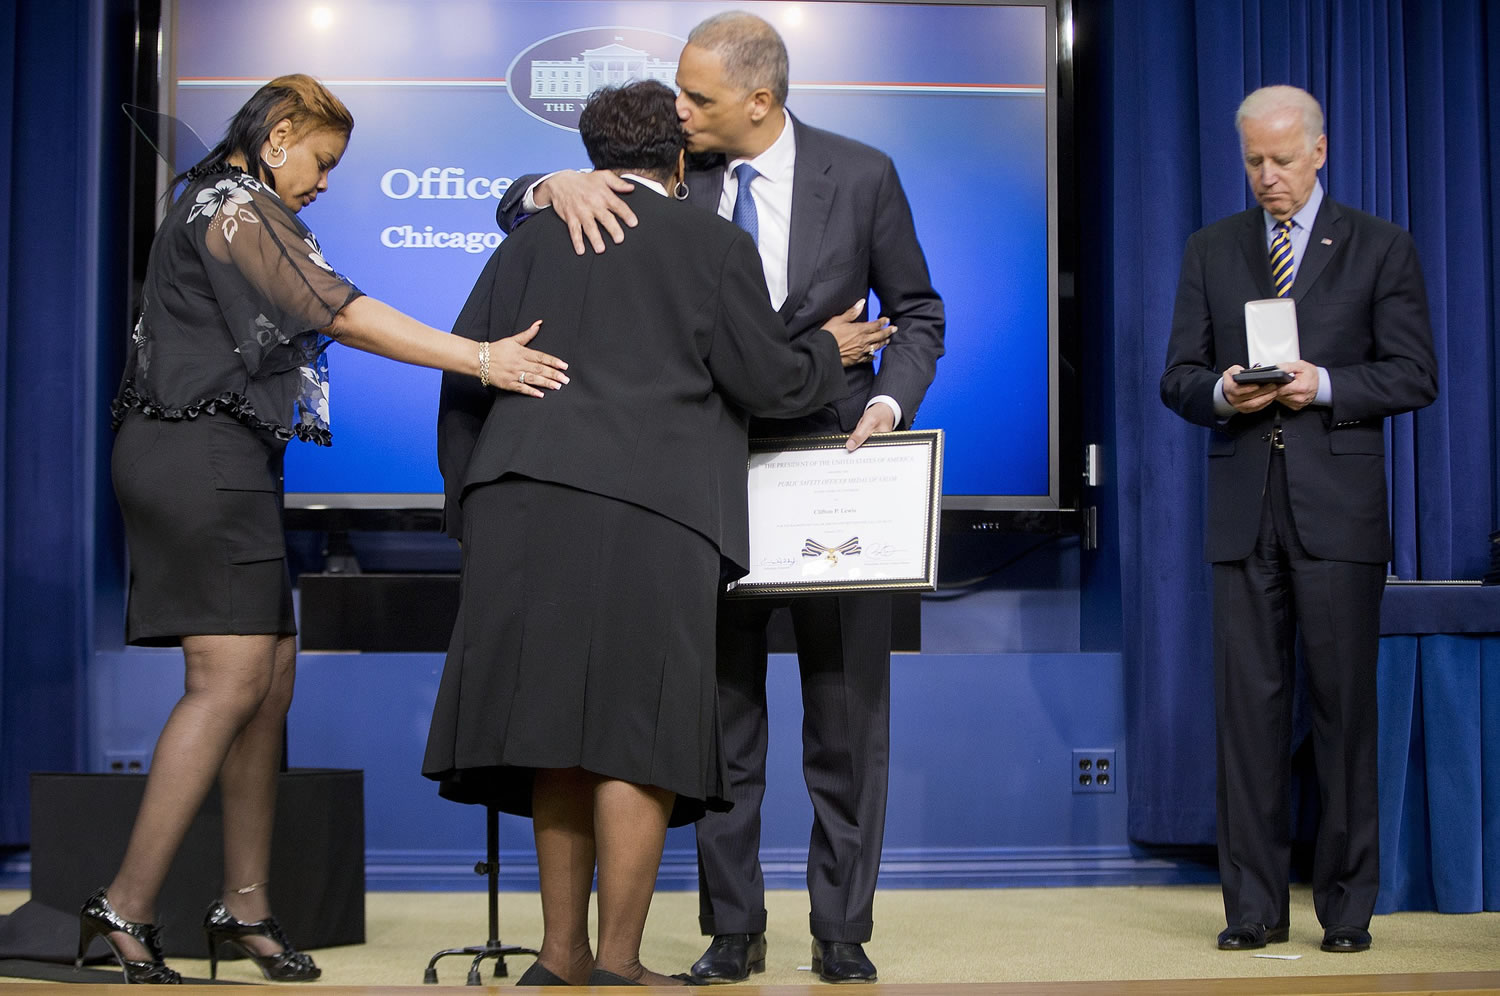 Attorney General Eric Holder embraces Maxine Hooks, center, mother of late Chicago Police Officer Clifton Lewis, who was awarded the Medal of Valor posthumously during a ceremony Wednesday in the Old Executive Office Building on the White House Complex in Washington.